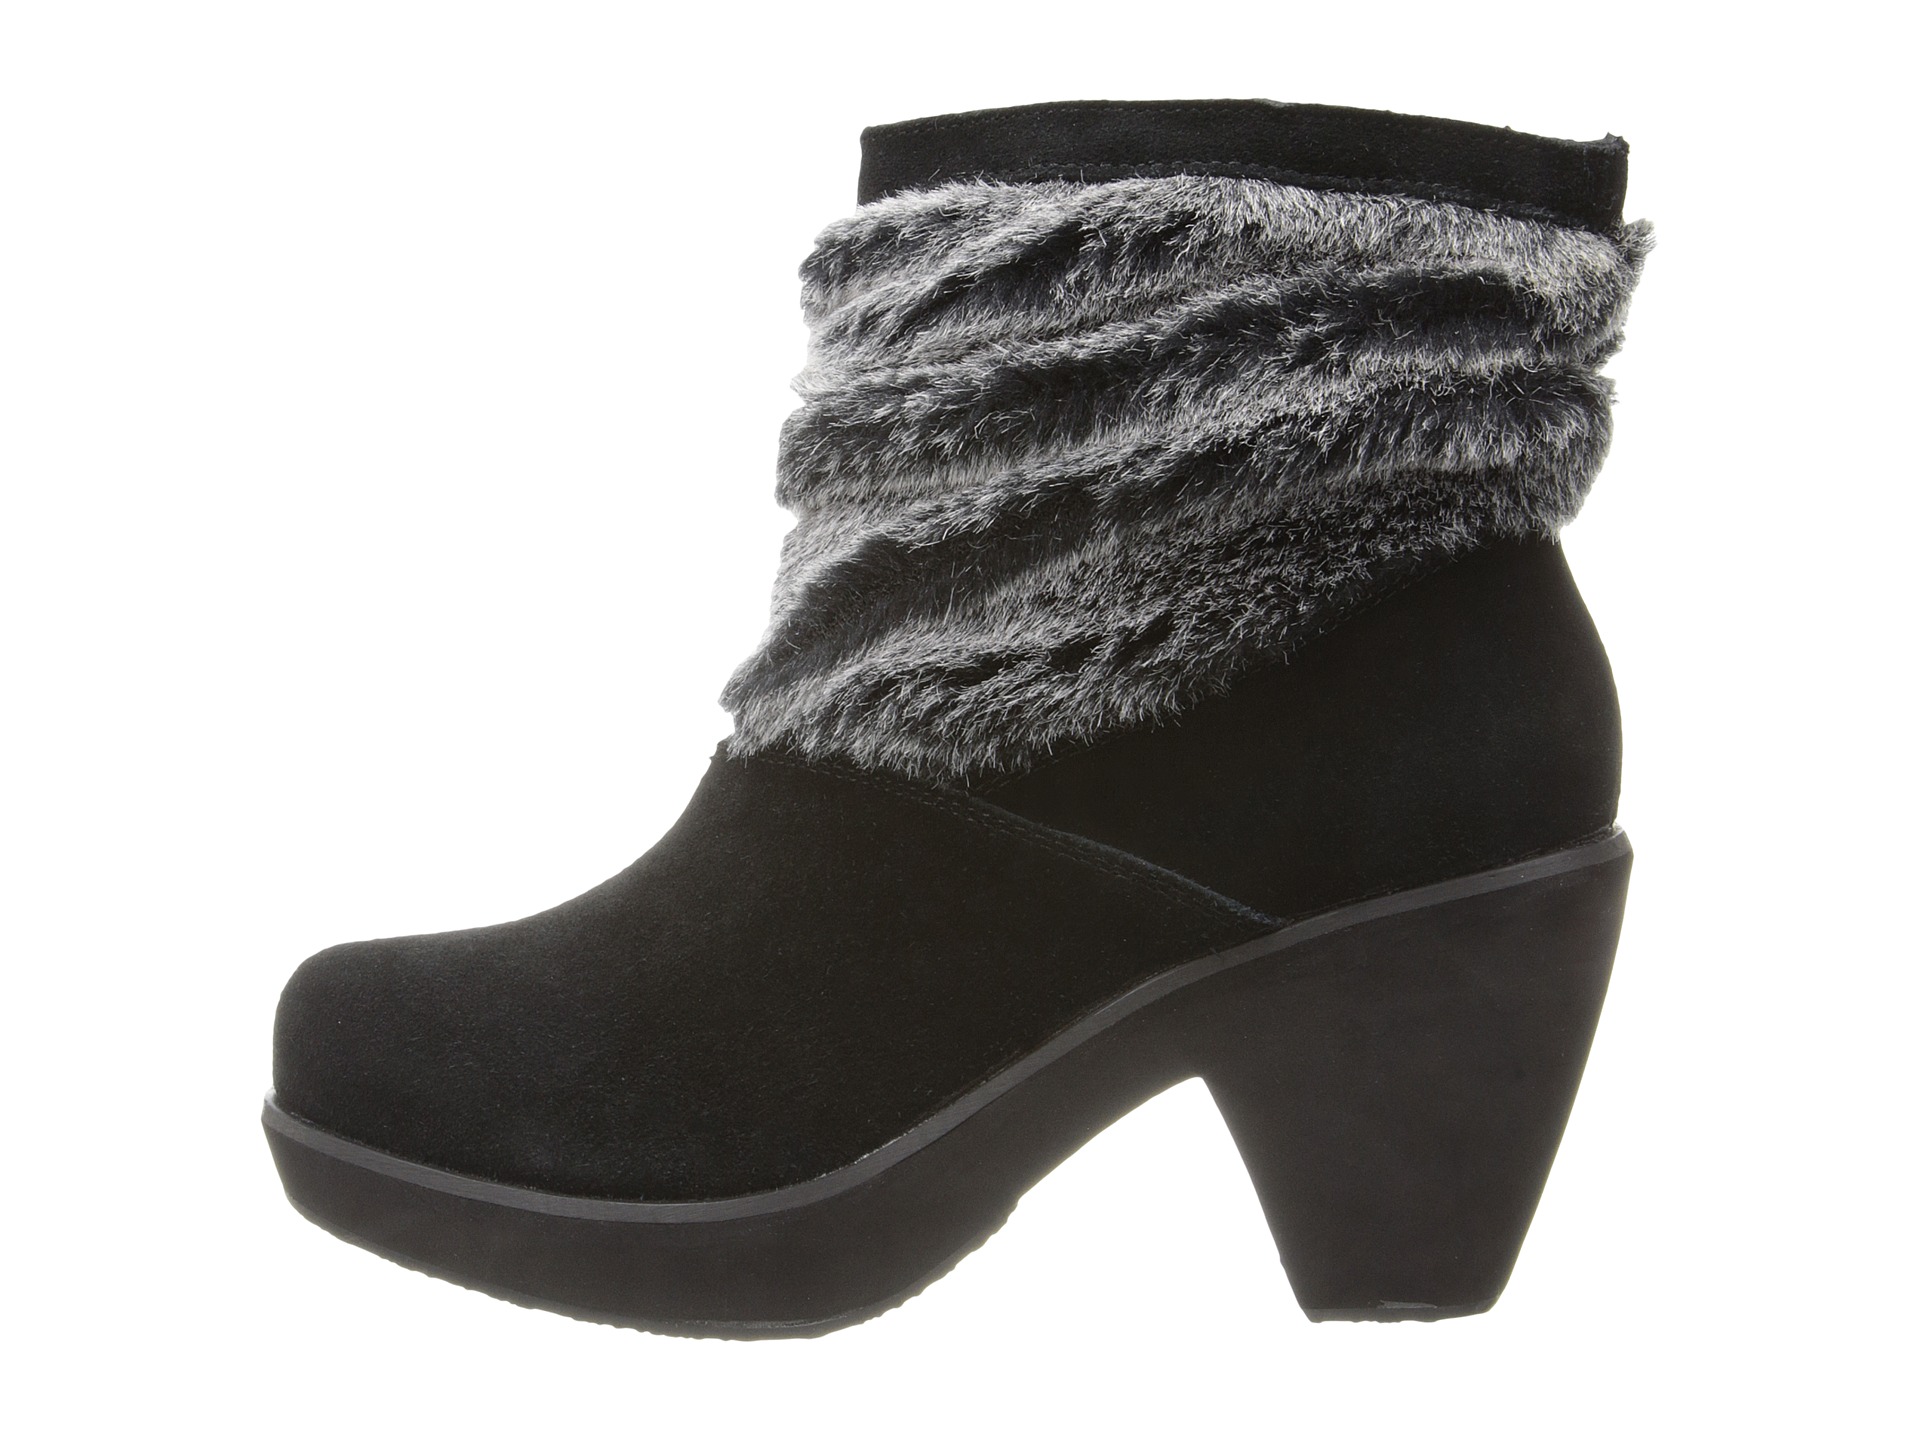 Skechers Disco Bunny Boot Black | Shipped Free at Zappos